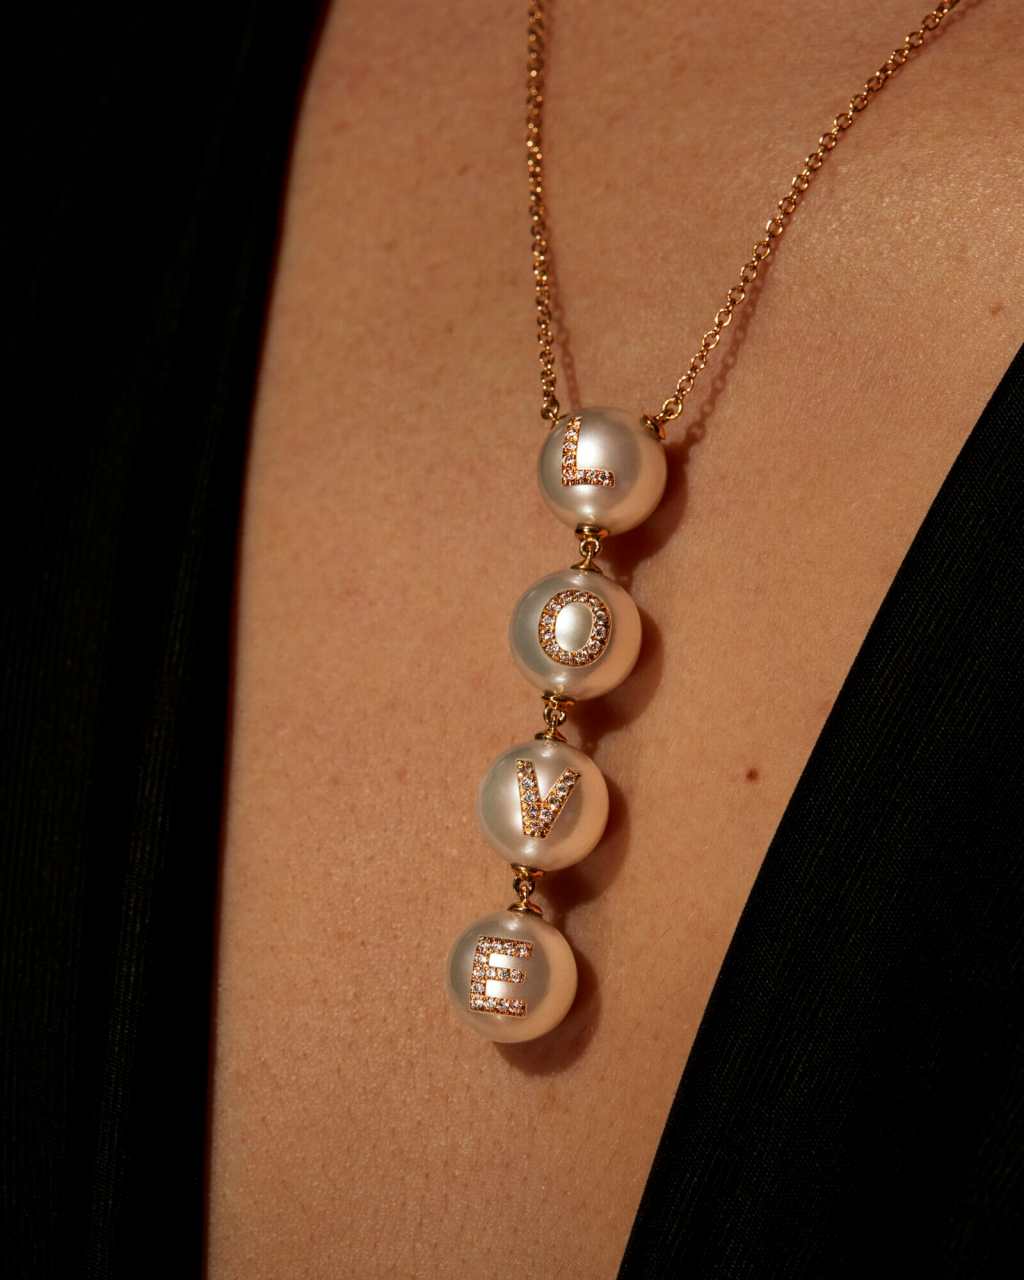 Diamonds and pearls, love necklace